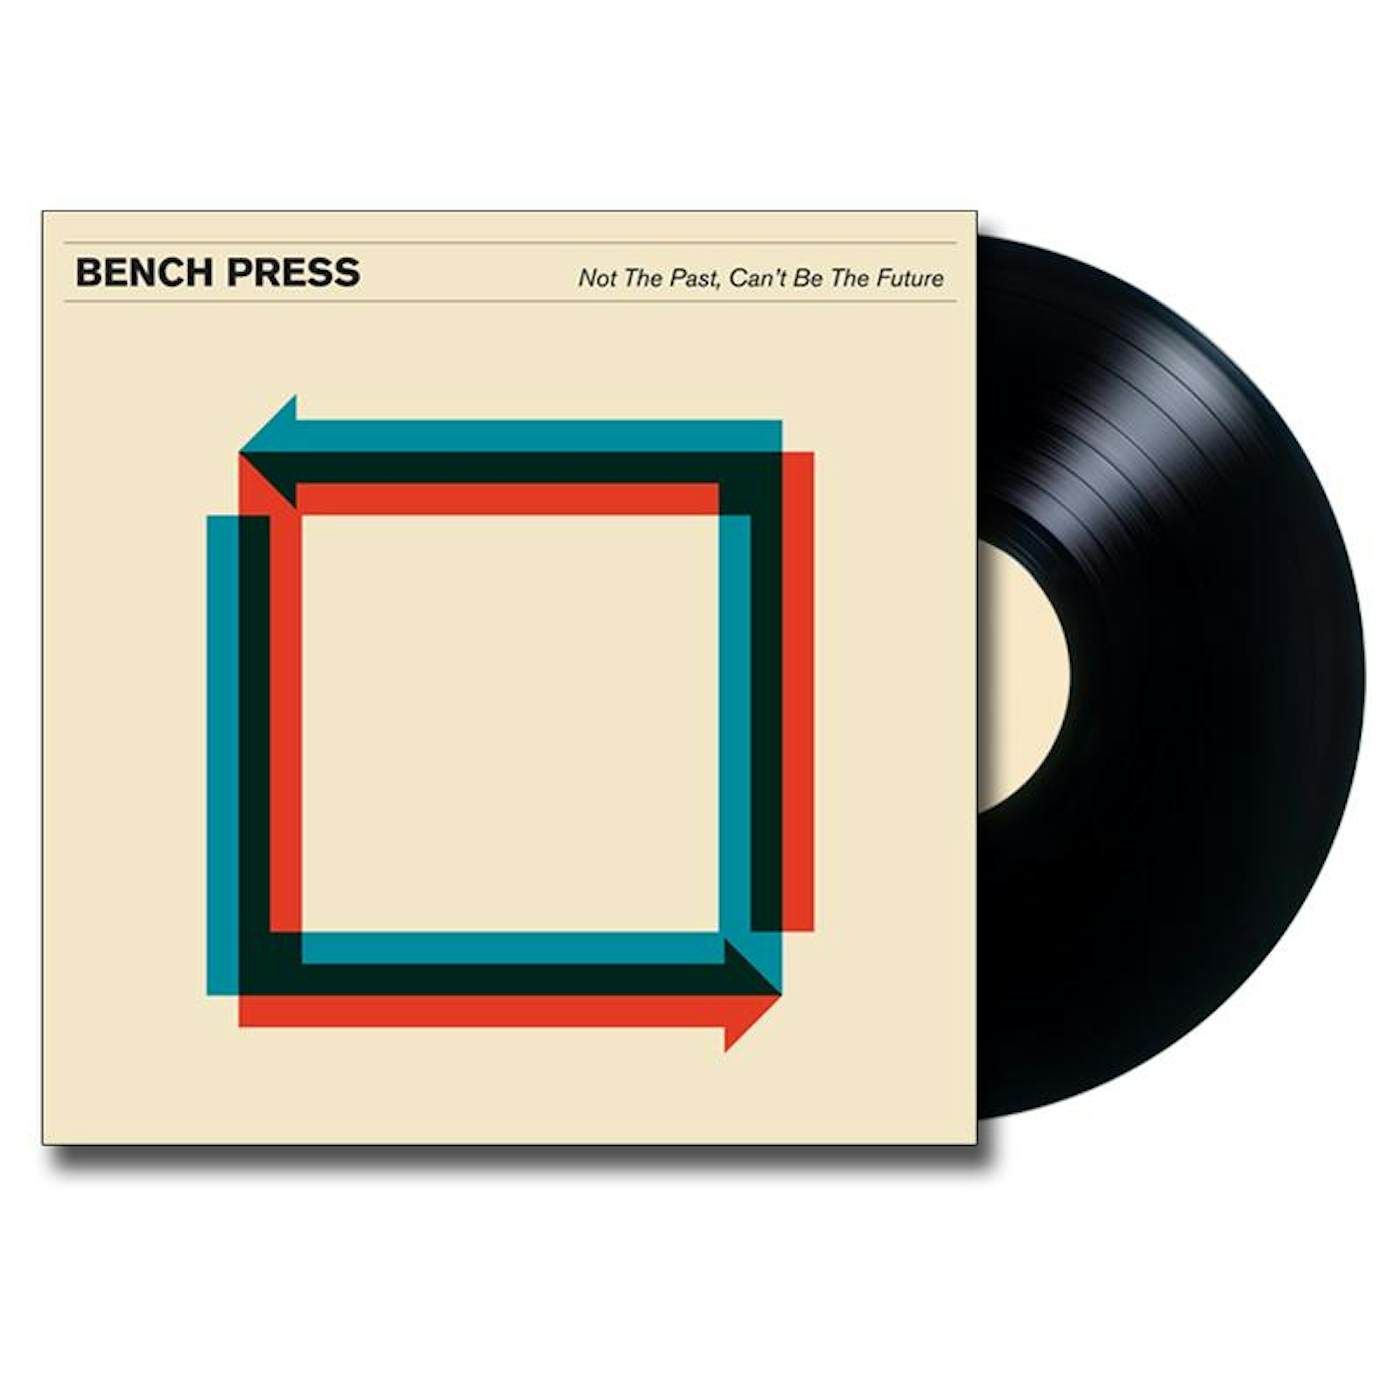 Bench Press Not The Past, Can’t Be The Future LP (Black) (Vinyl)